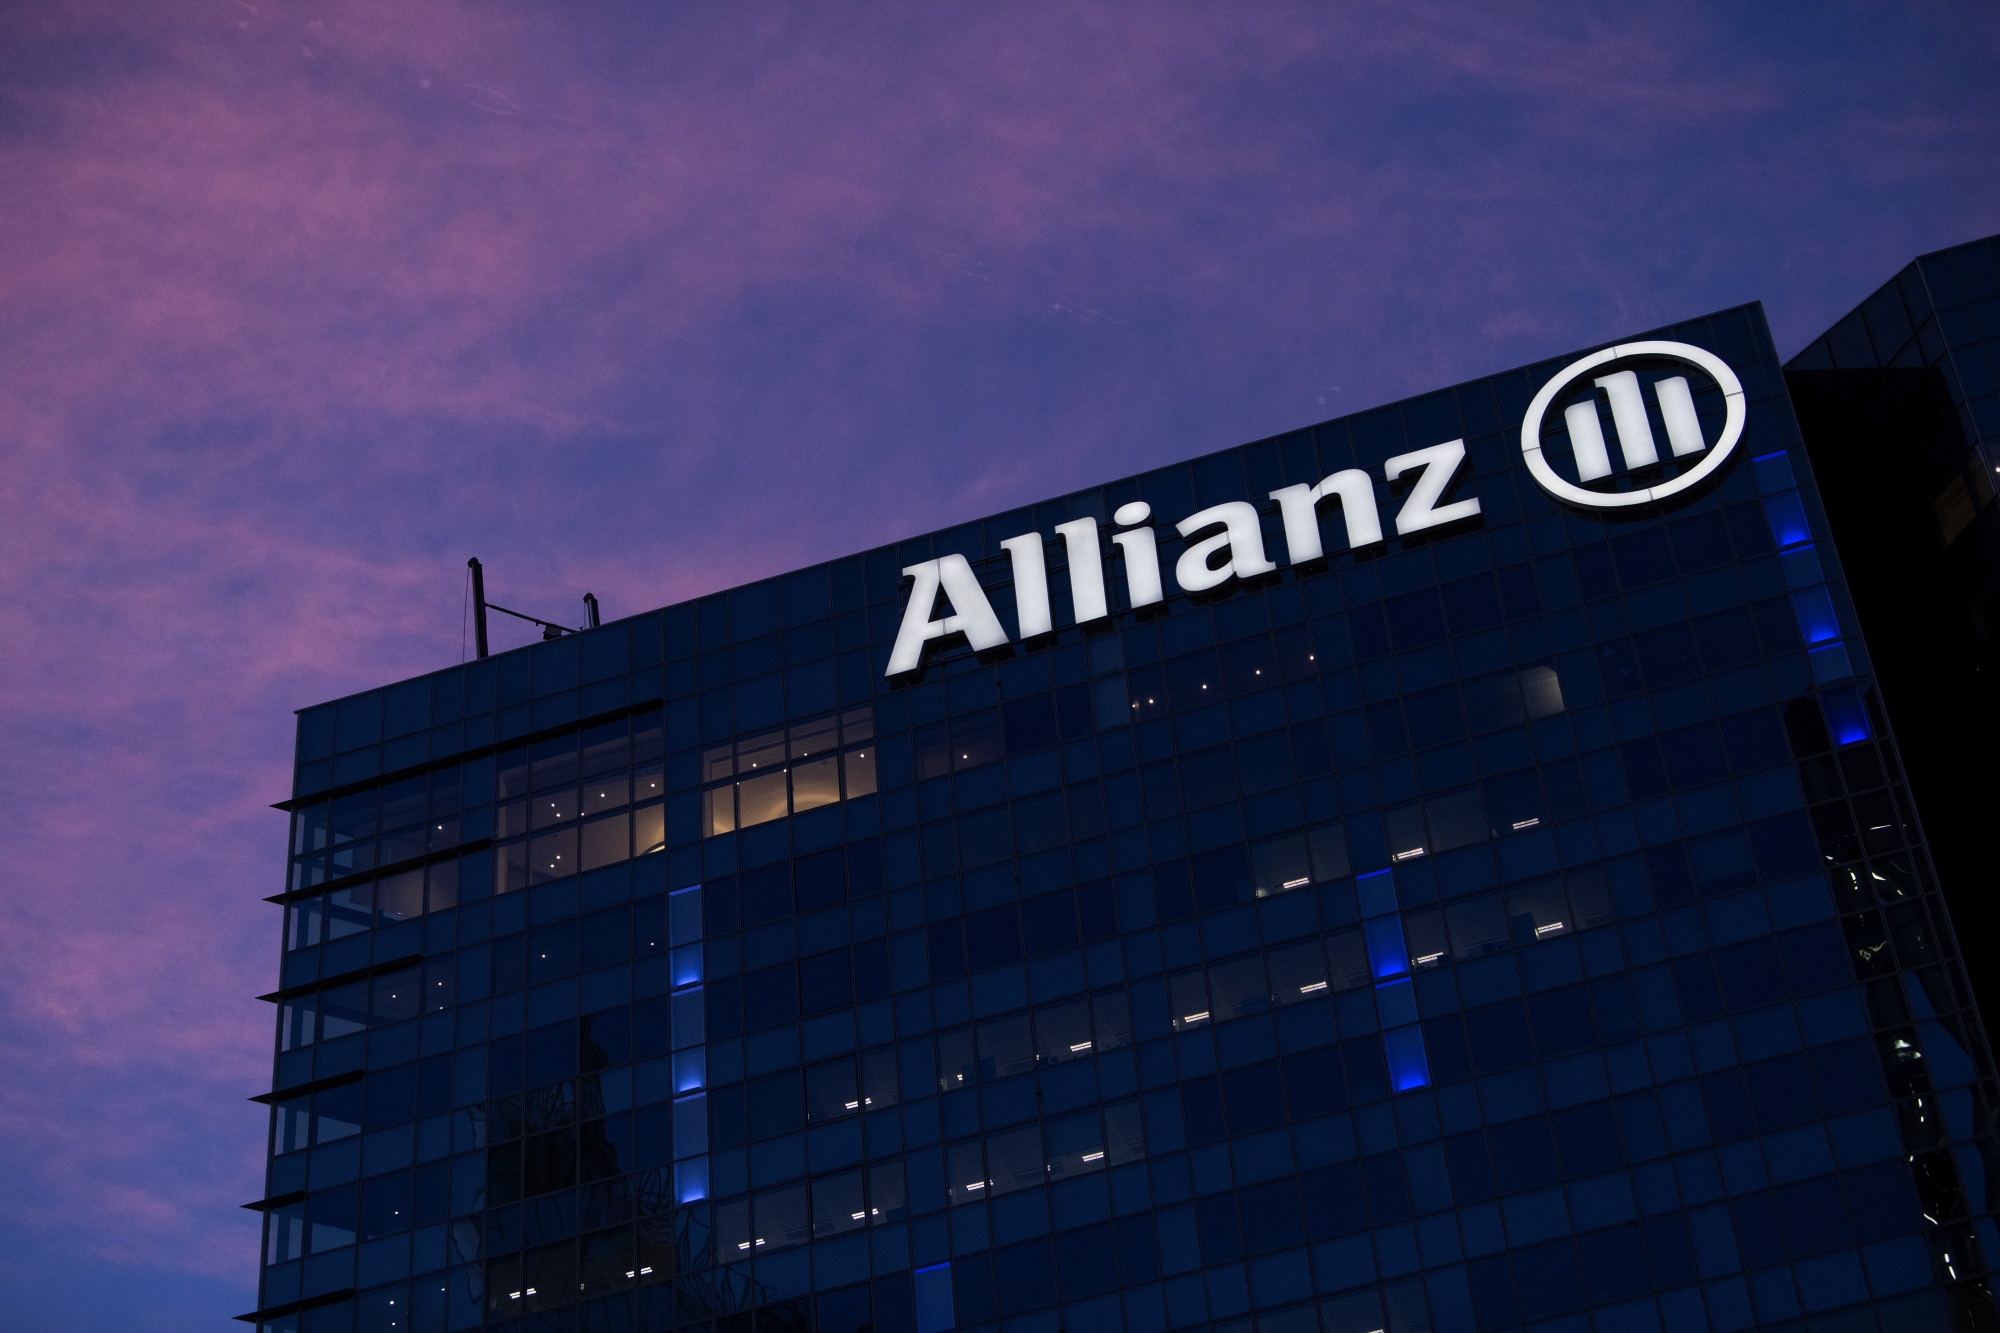 Blue Cross Points Fingers at Aon After Allianz's $7 Billion Hedge Fund  Blowup - Bloomberg